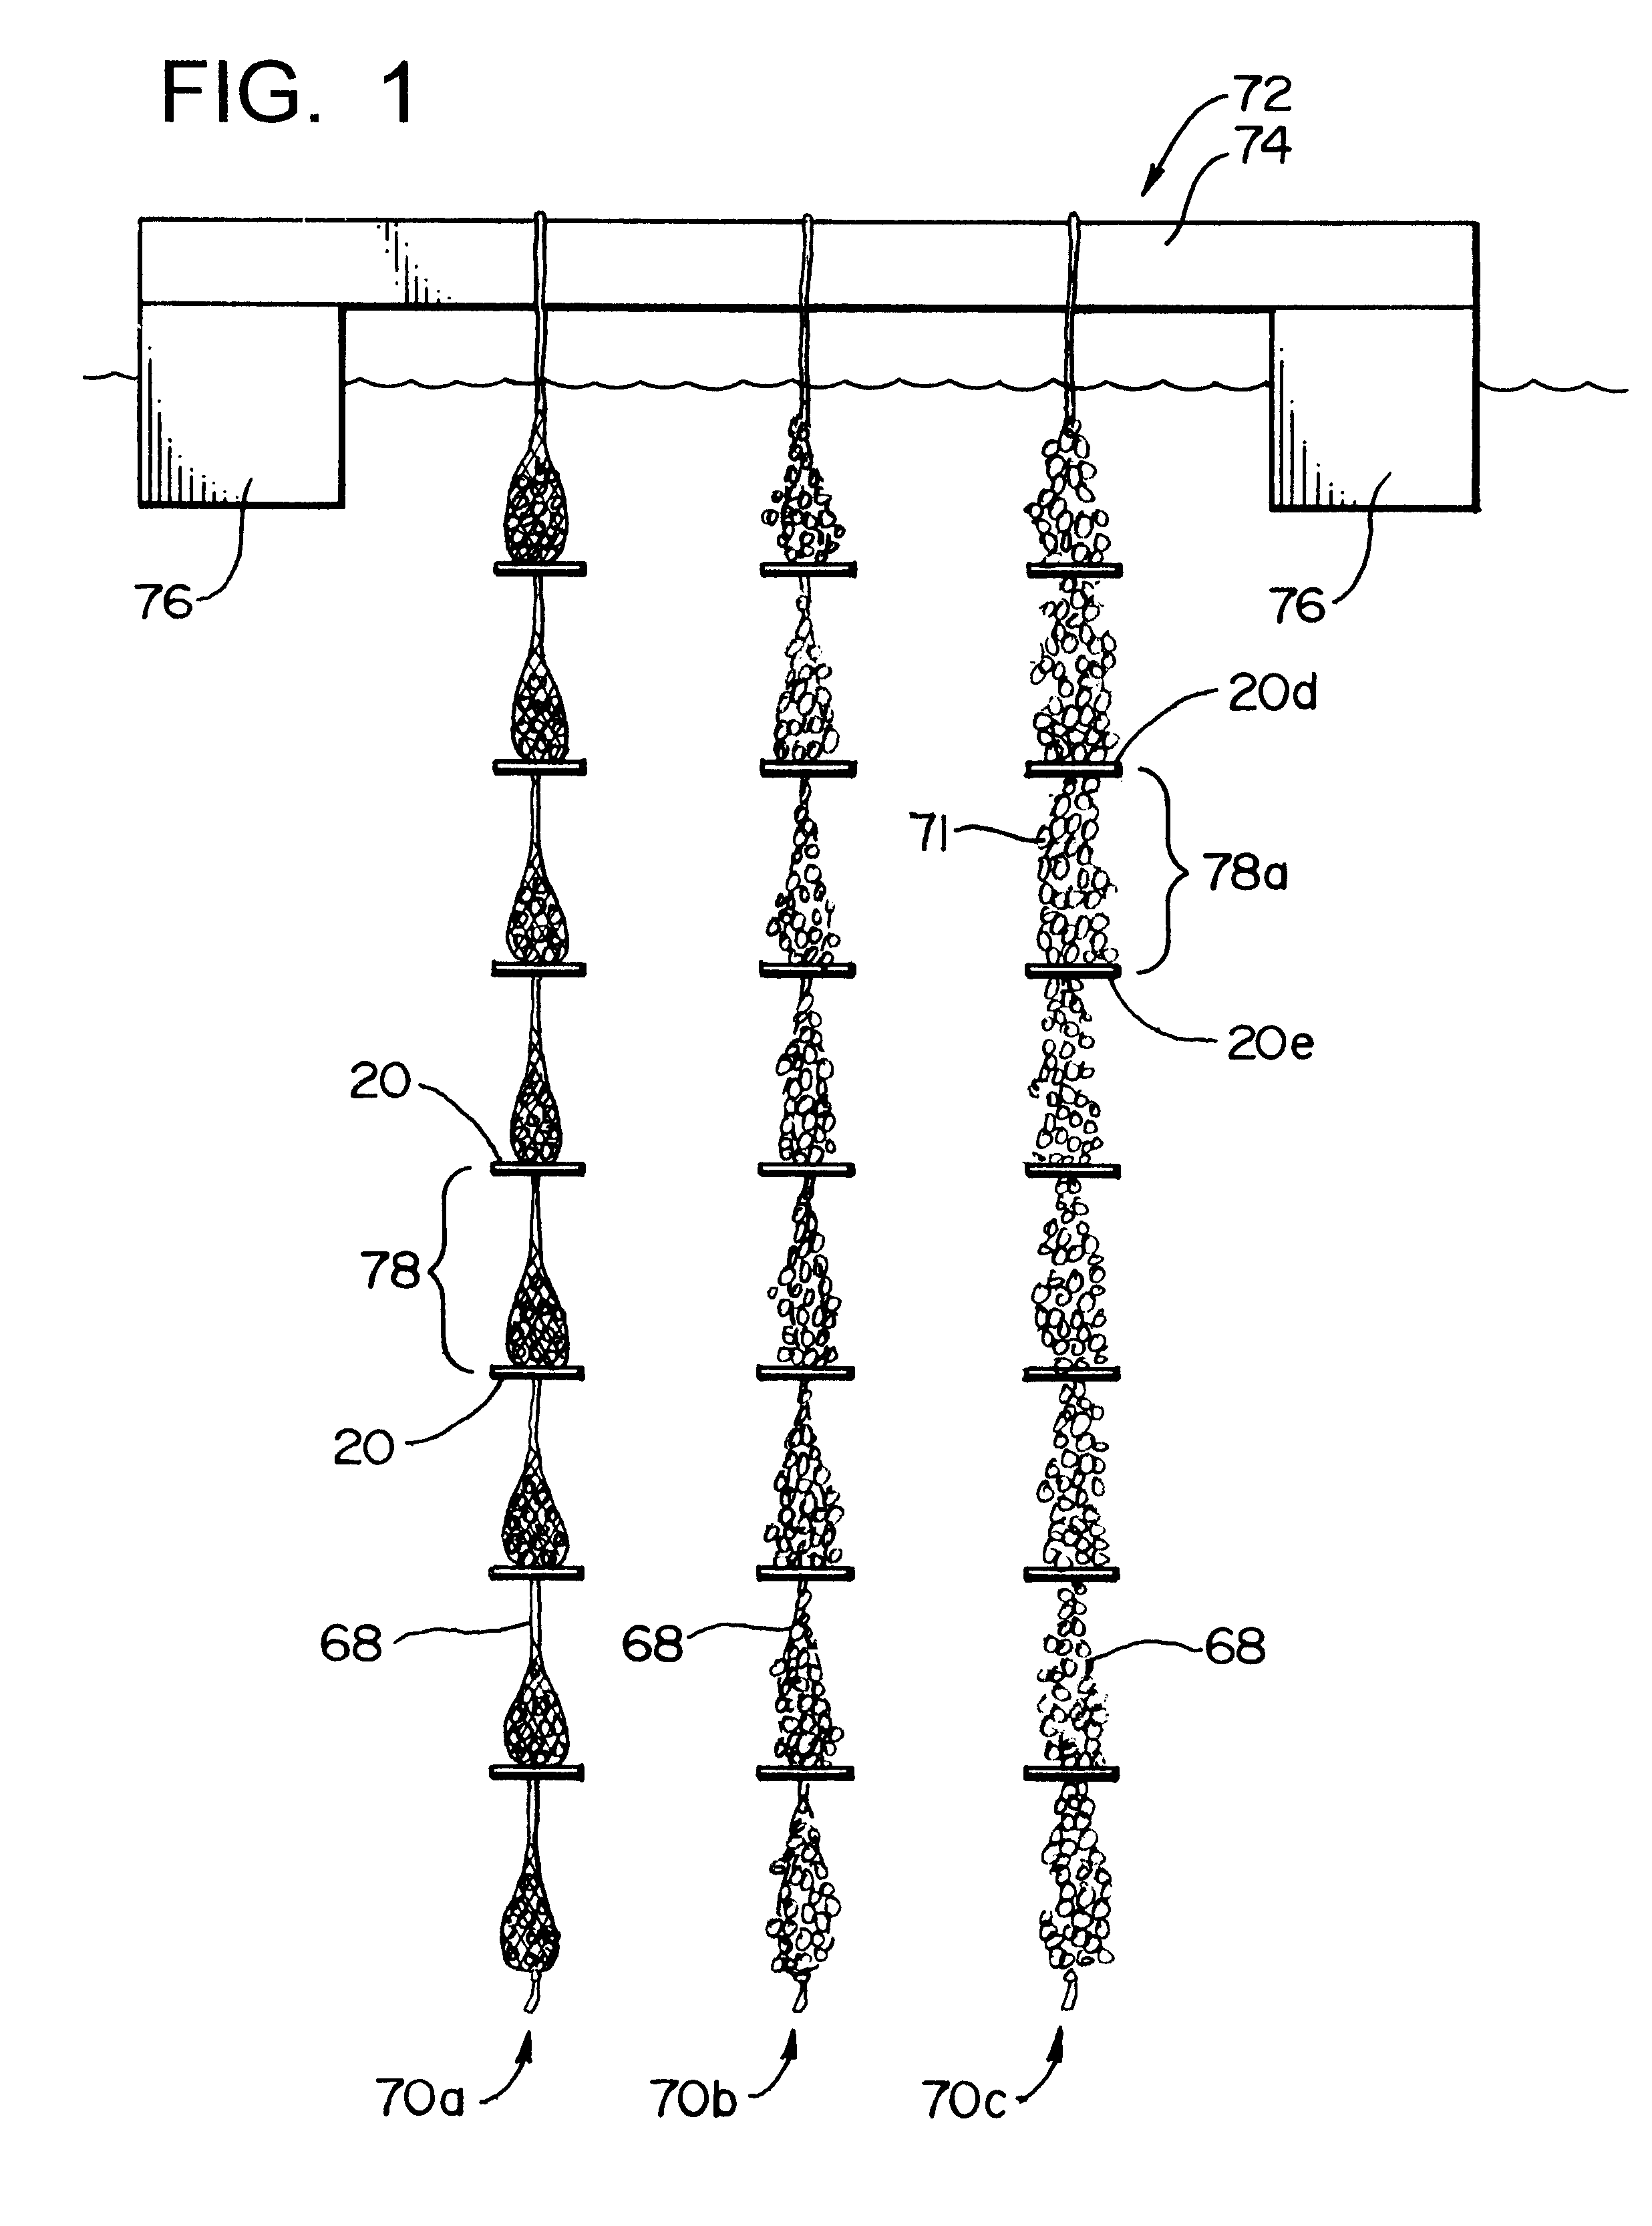 Method and apparatus for supporting aquacultured mussels